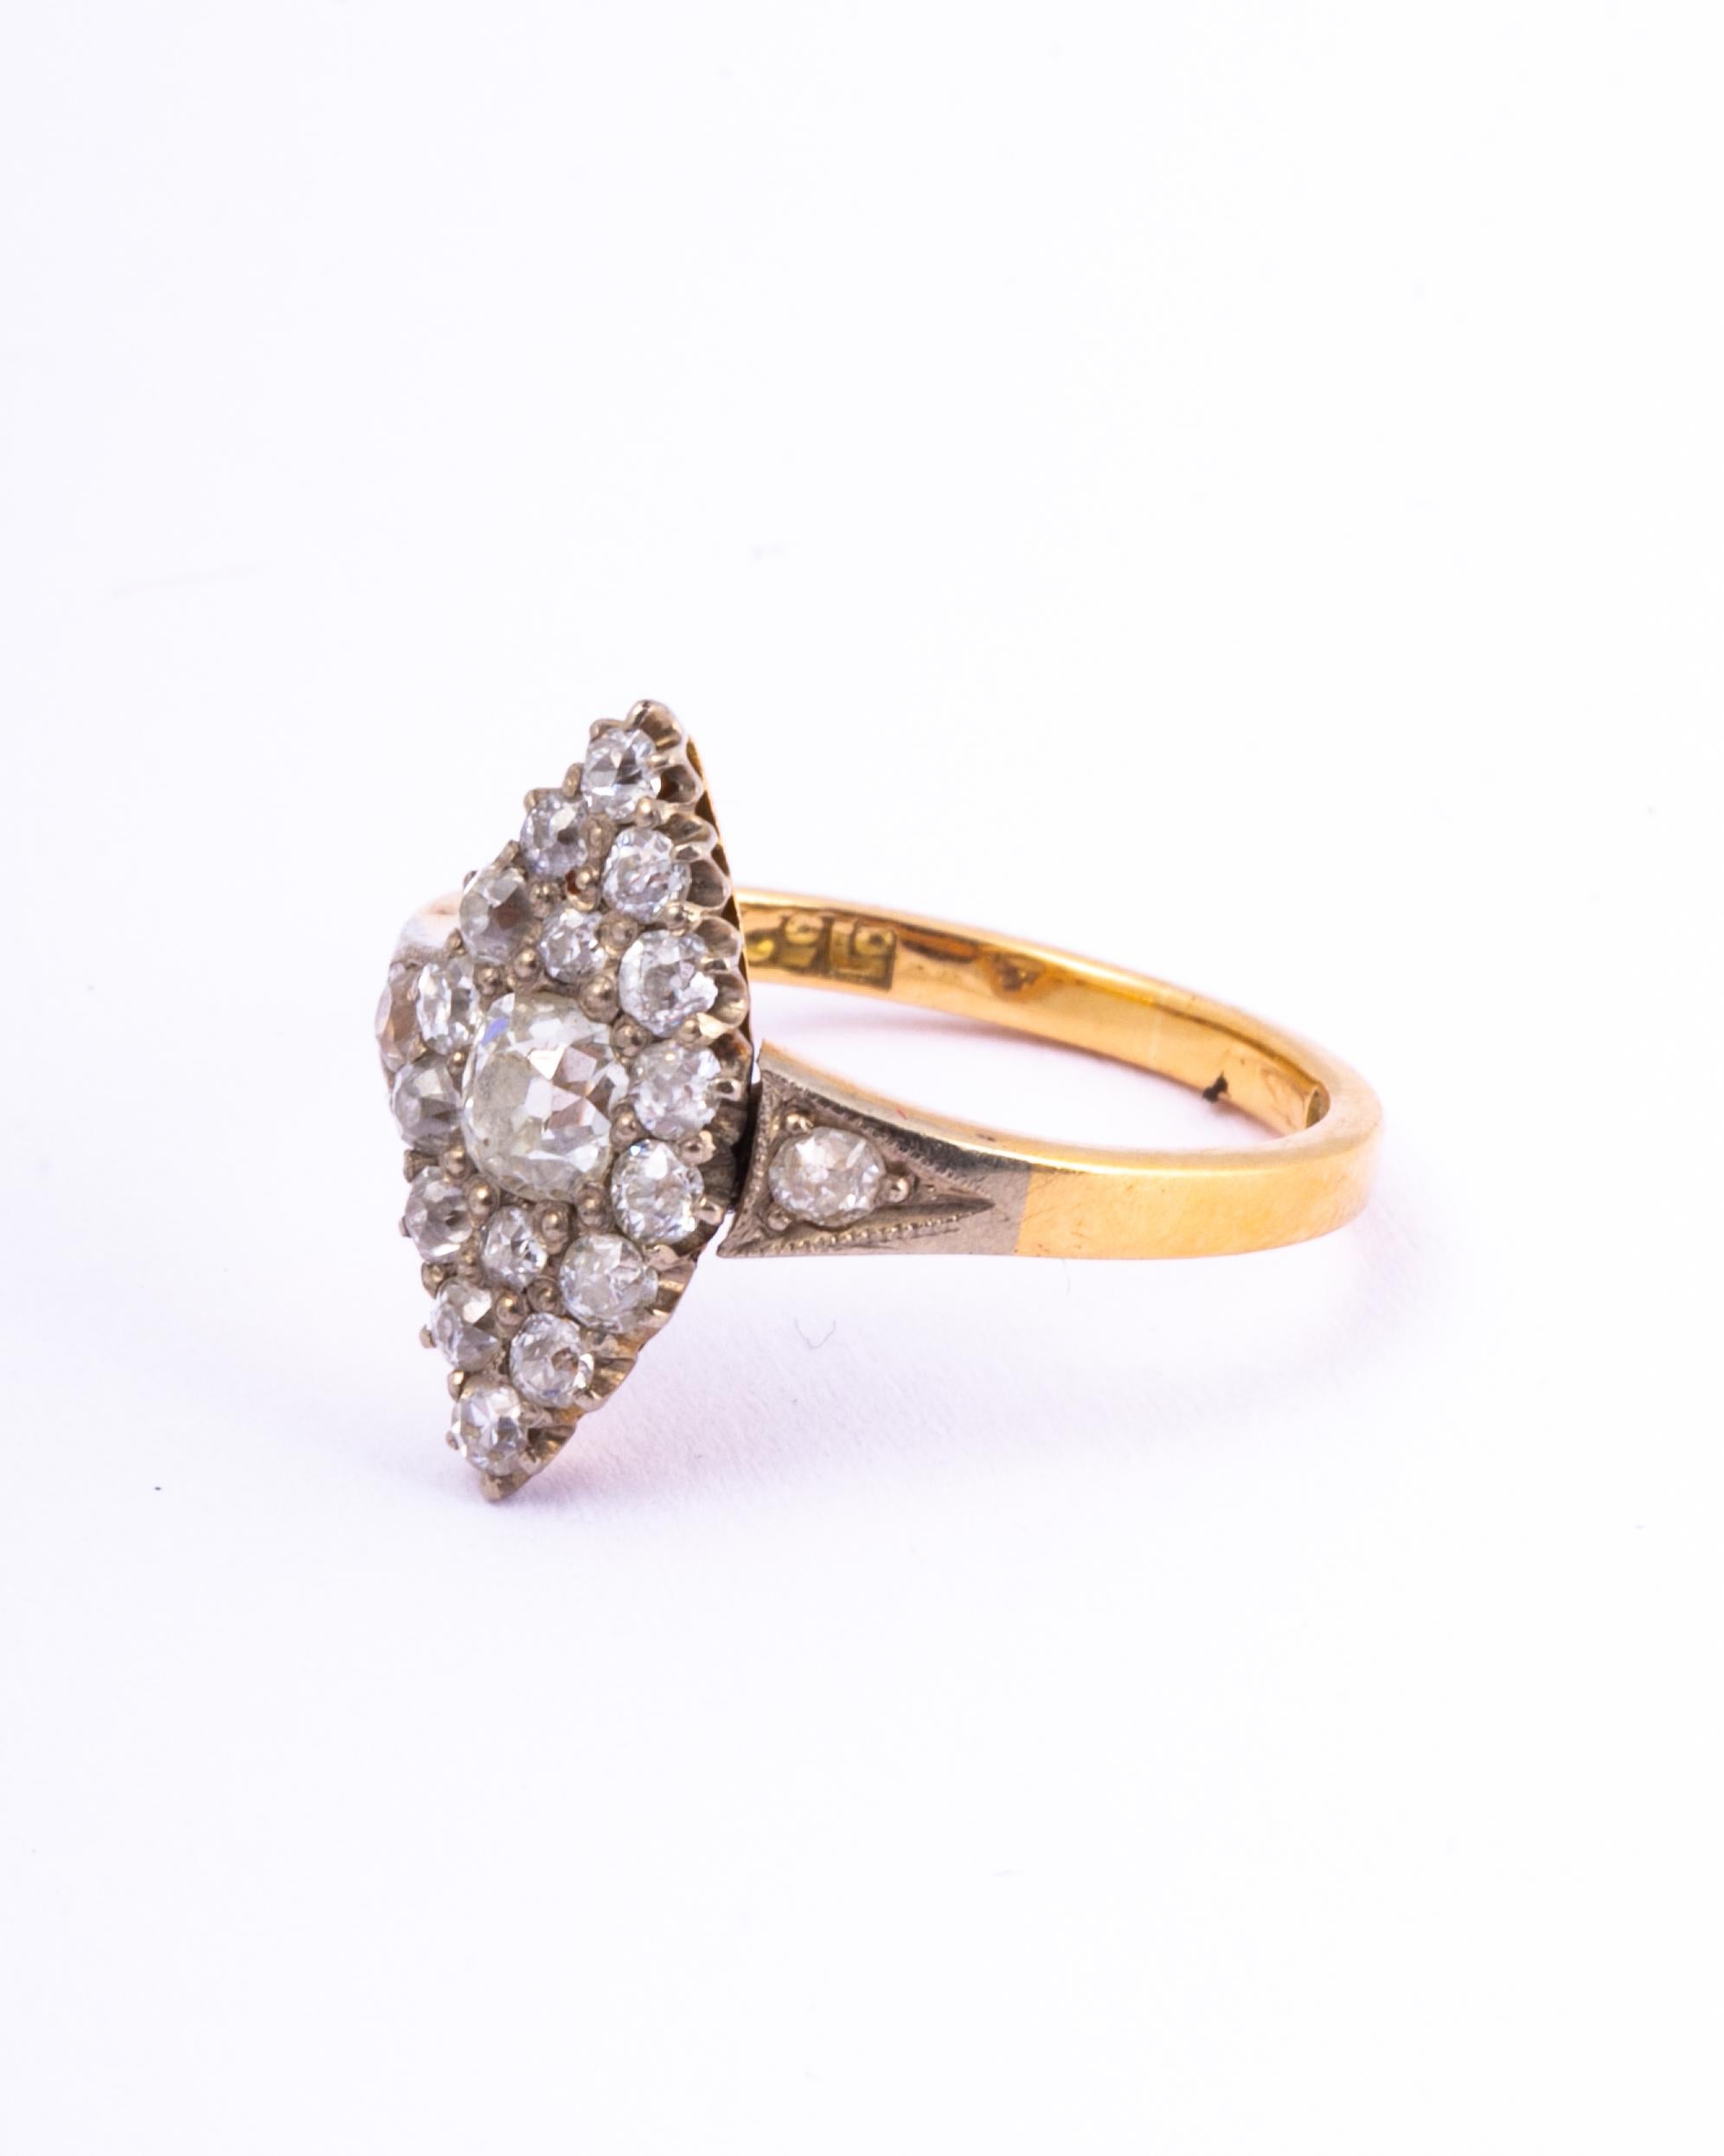 The diamond in this marquise ring are old Mine cut and are very bright and sparkly. The total carat weight of the ring is approx 1ct. The stones are set in platinum and the rest of the ring is modelled in 18ct gold with diamond shoulders. 

Ring